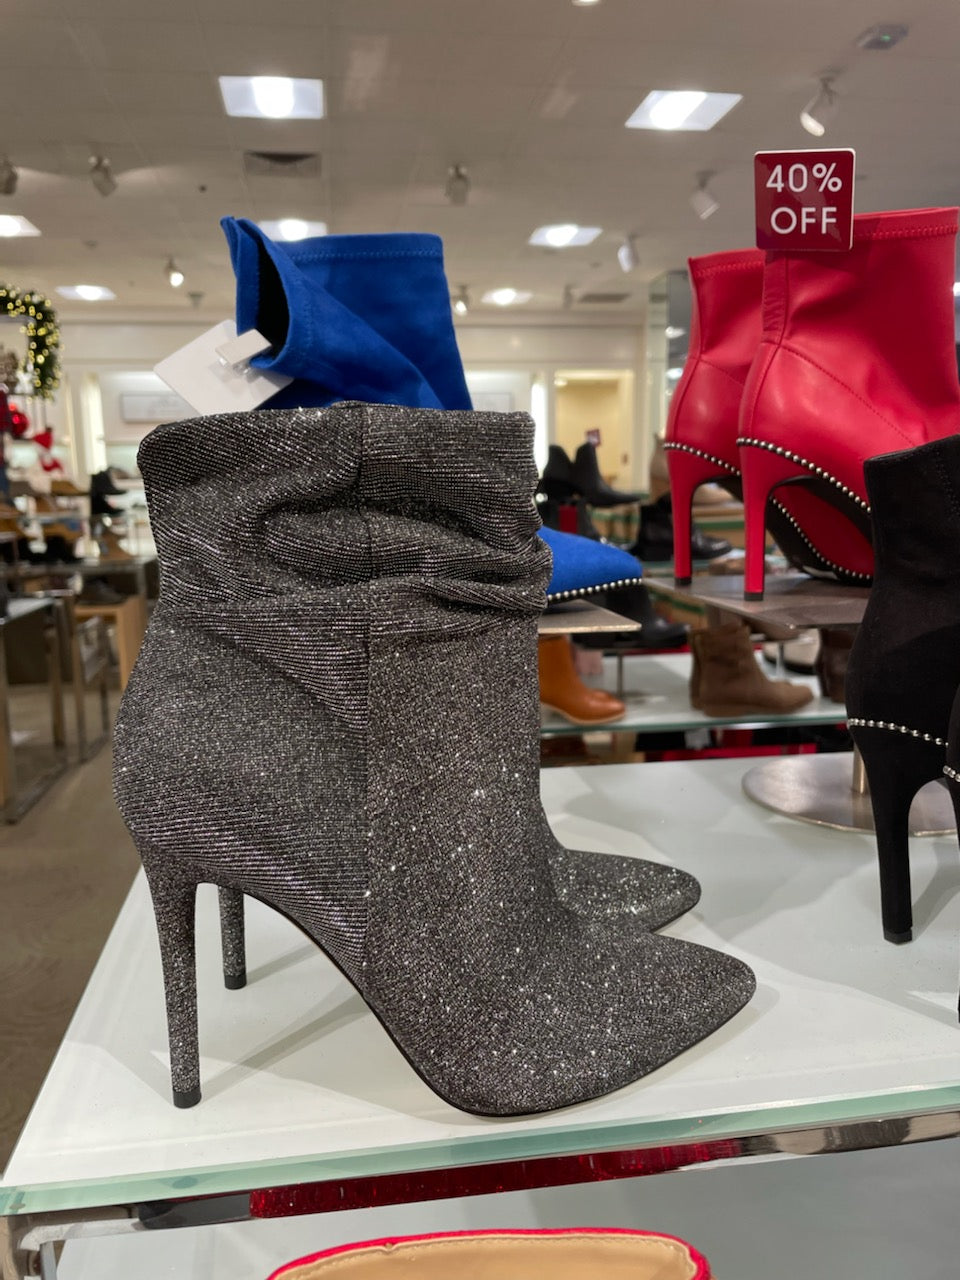 The Beauty That Is Booties!